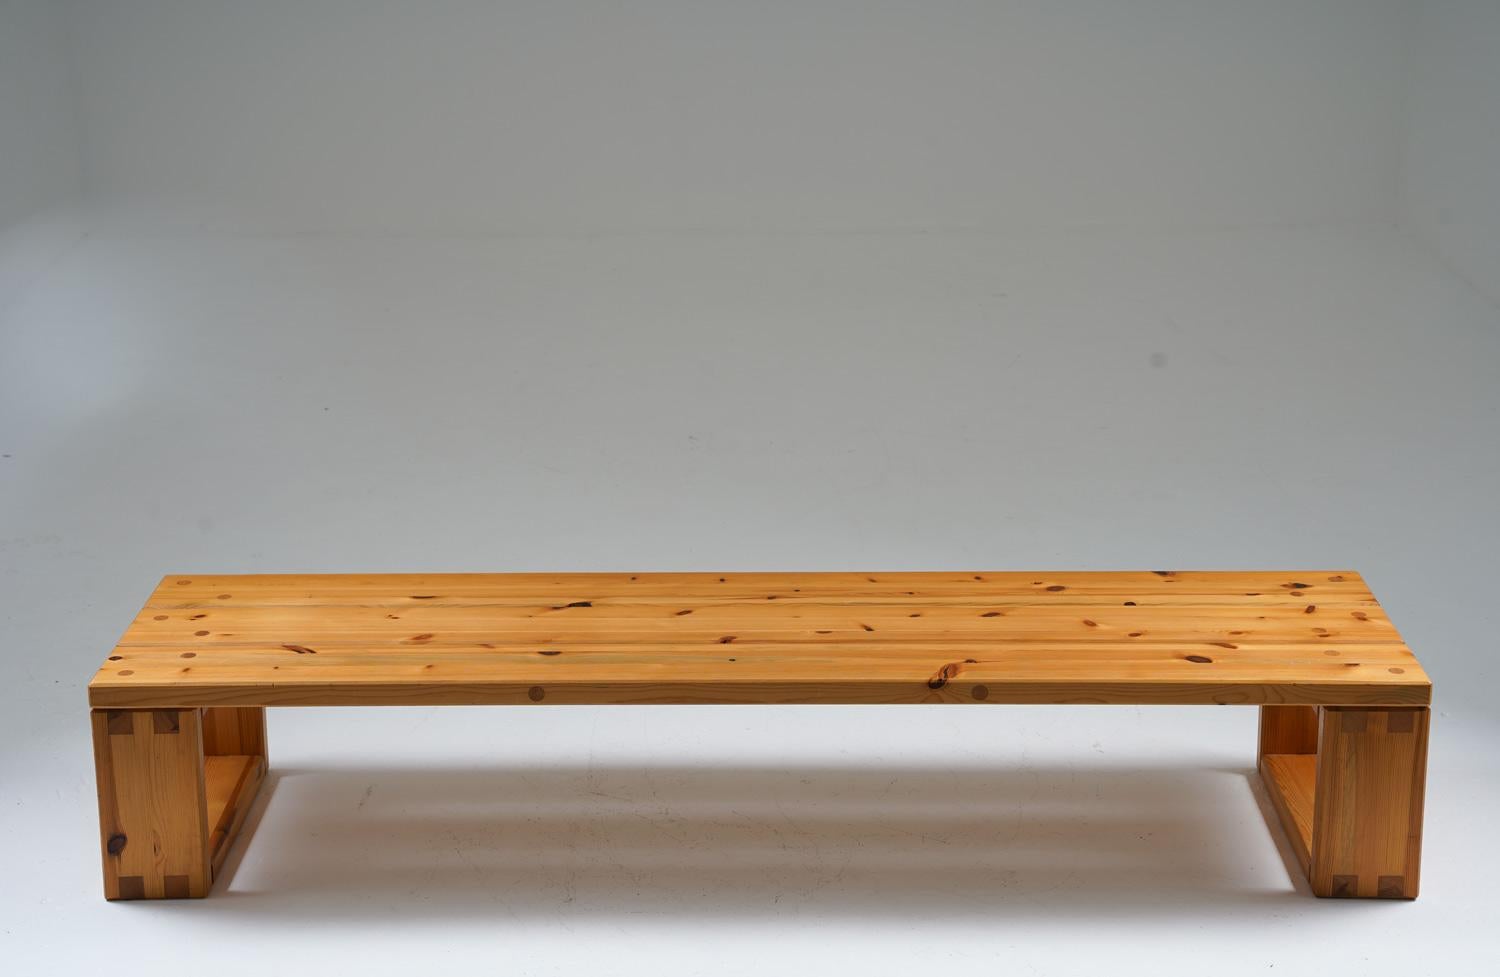 Bench with beautiful proportions and nice details. 
This long bench is excellent for using as a planter stand or a media bench, for example.

Condition: Very good original condition.
   